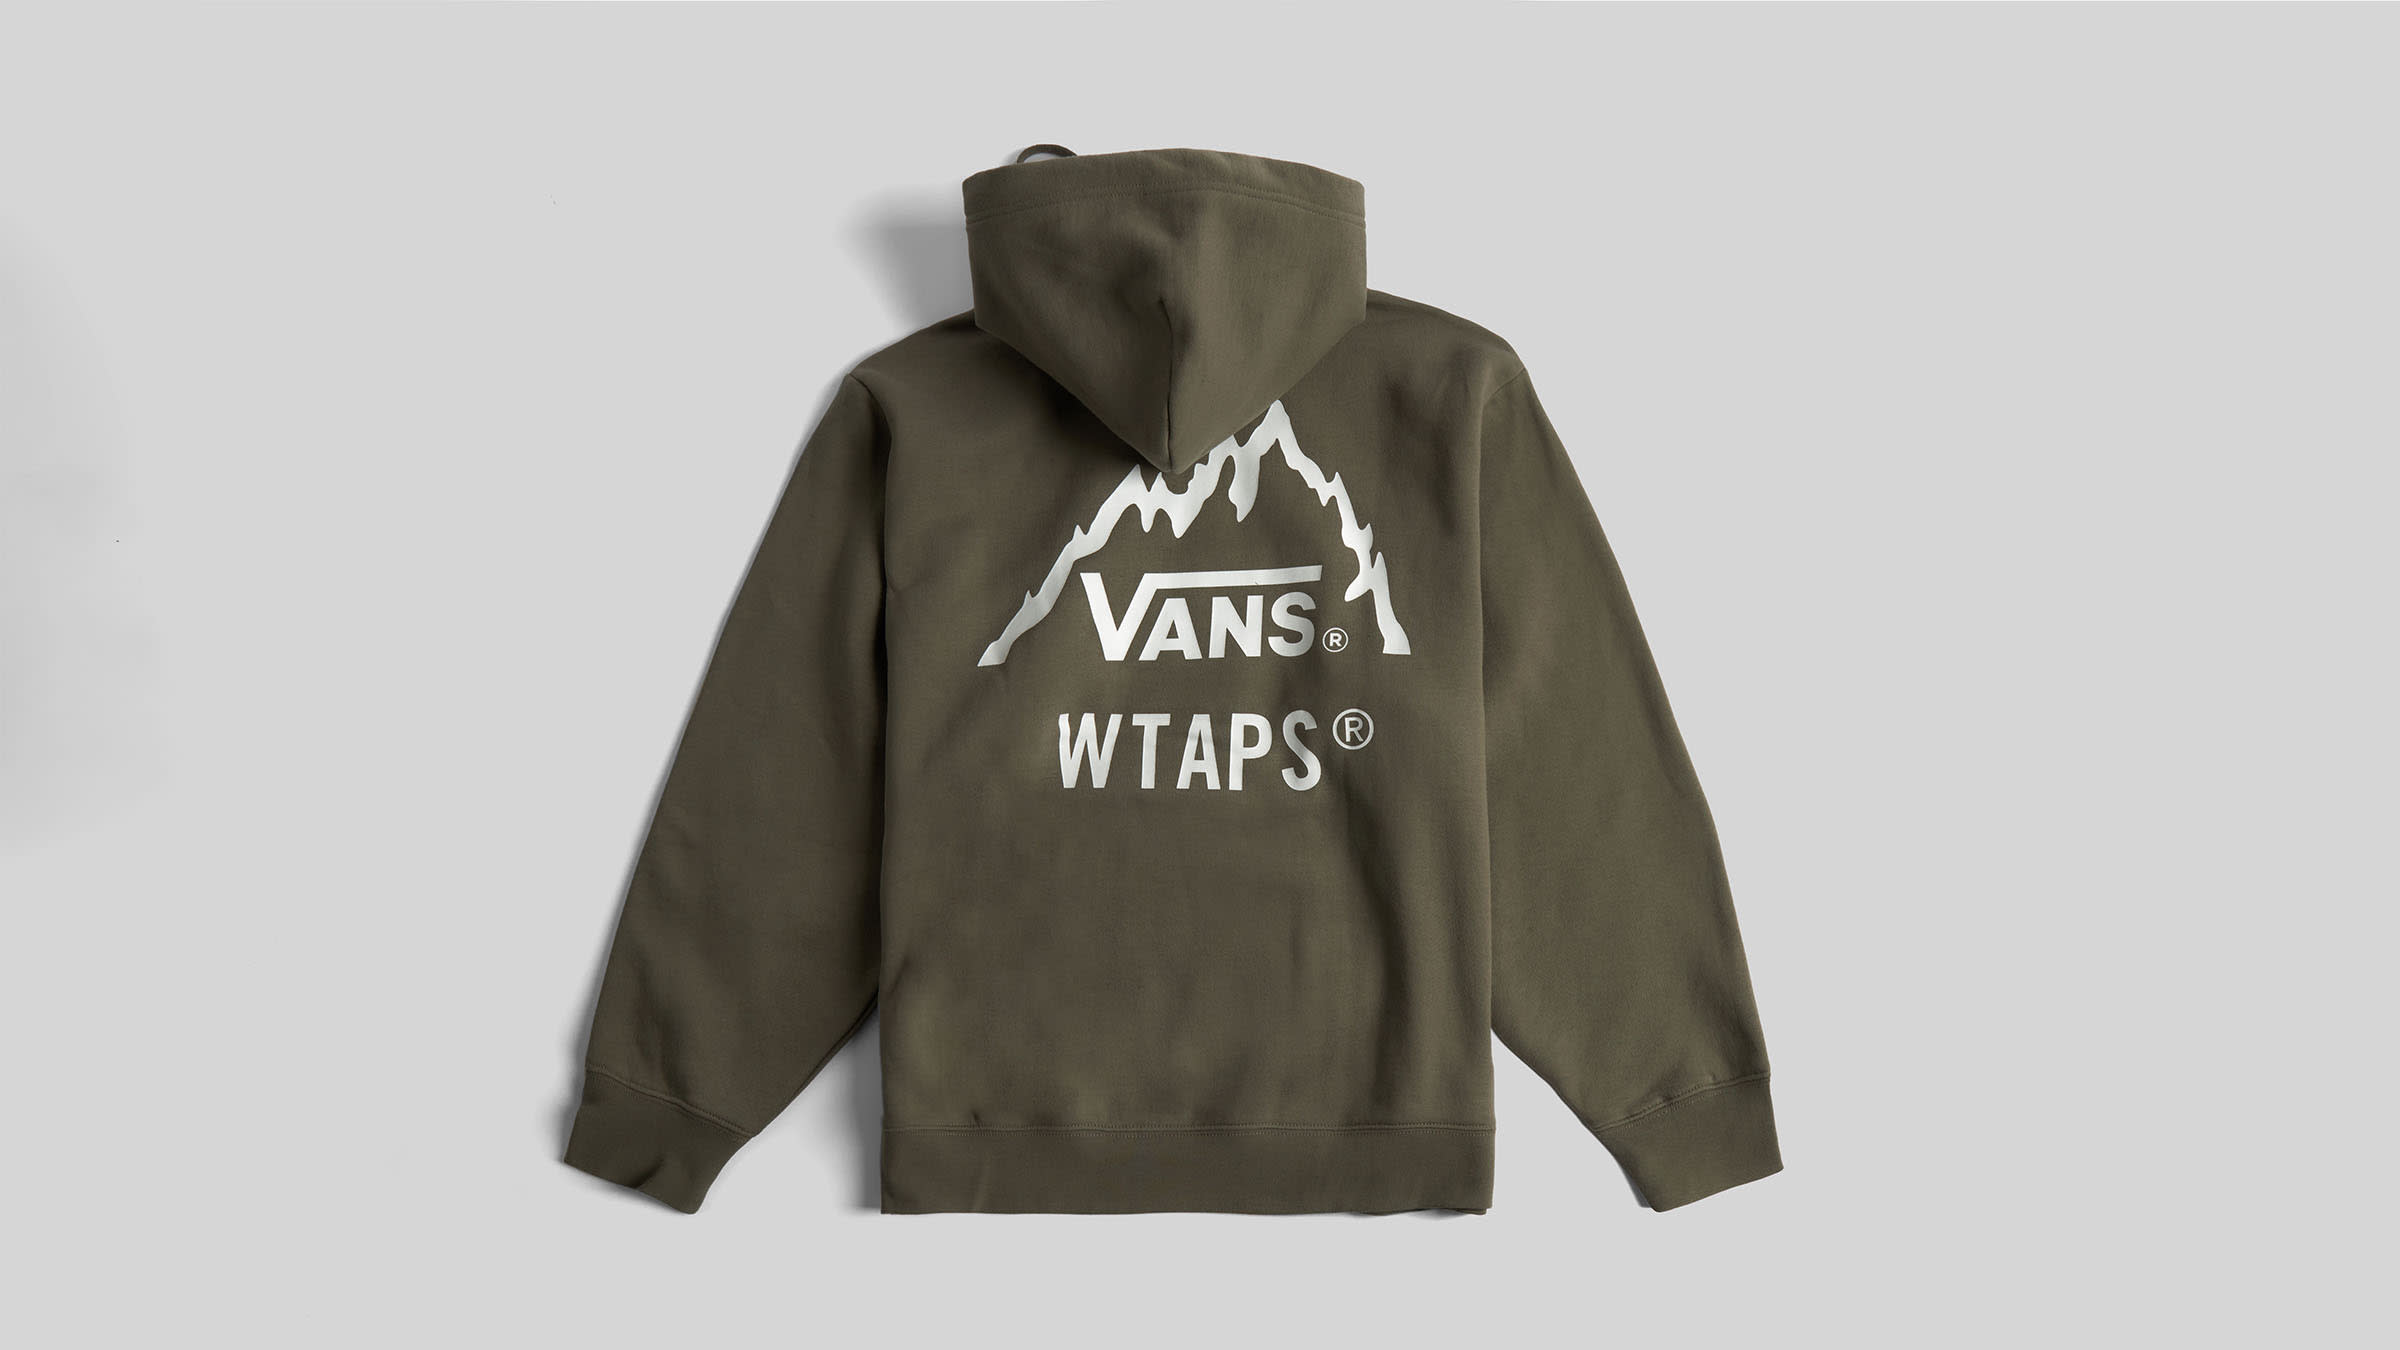 Vans Vault x WTAPS Hoody (Smokey Olive) | END. Launches